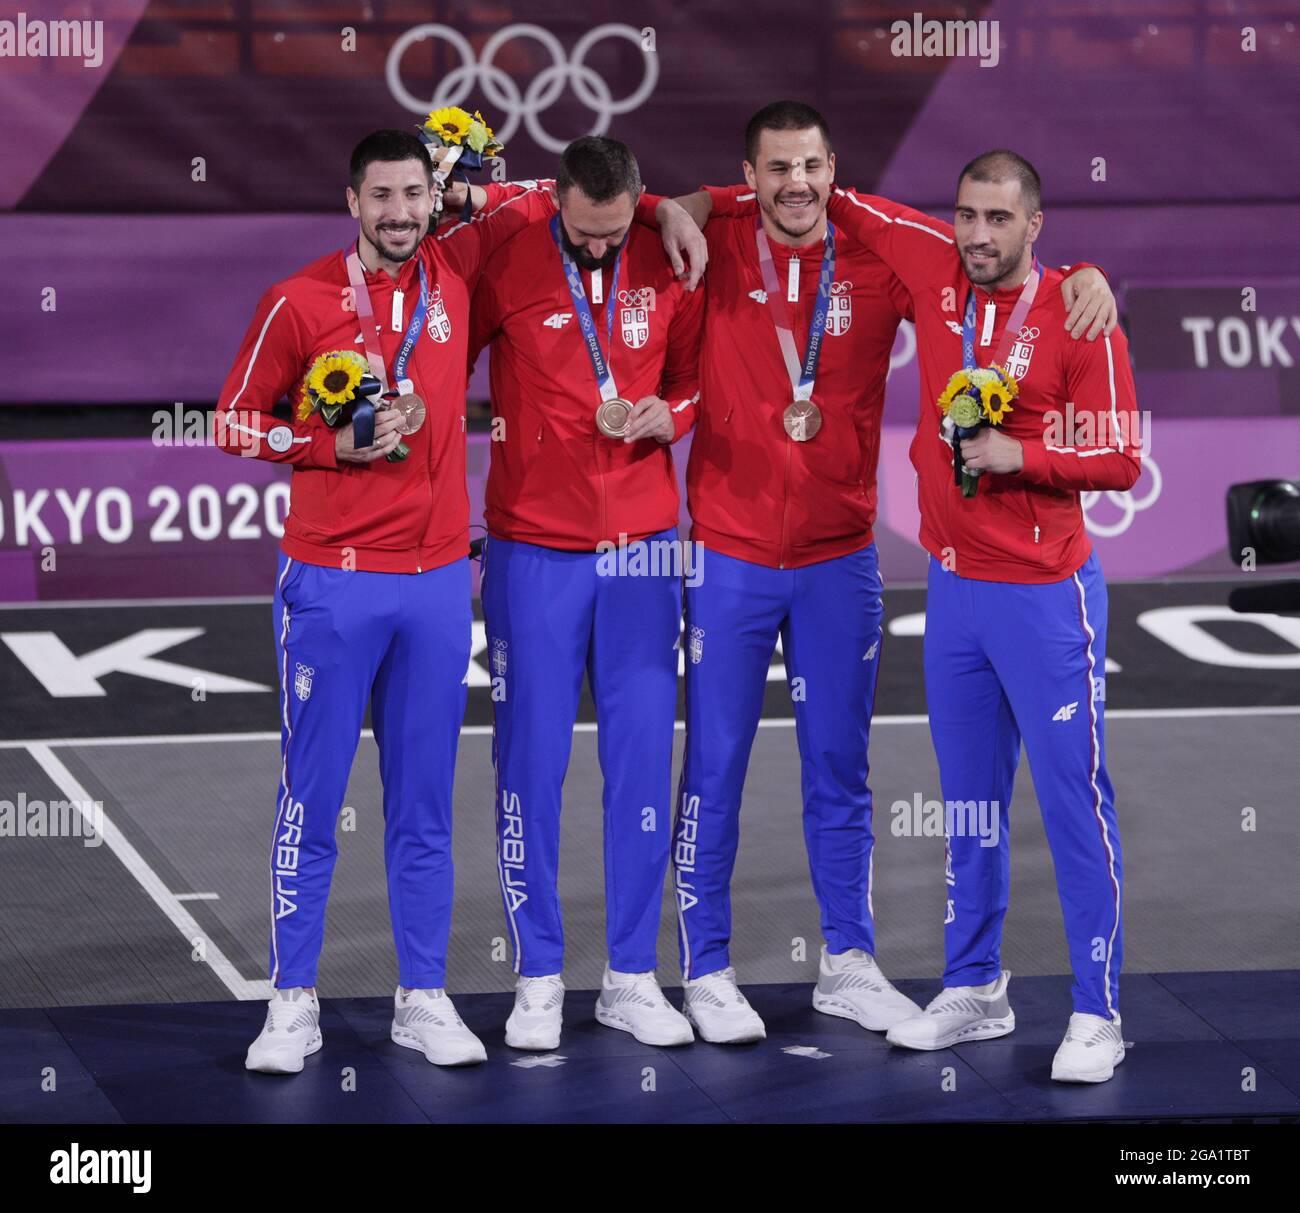 Tokyo, Japan. 28th July, 2021. Bronze medalists from Serbia pose on the podium after defeating Belgium in the Men's 3X3 Basketball at the Tokyo Summer Olympics in Tokyo, Japan, on Wednesday, July 28, 2021. This was the first year 3X3 basketball was an Olympic event. Photo by Bob Strong/UPI. Credit: UPI/Alamy Live News Stock Photo